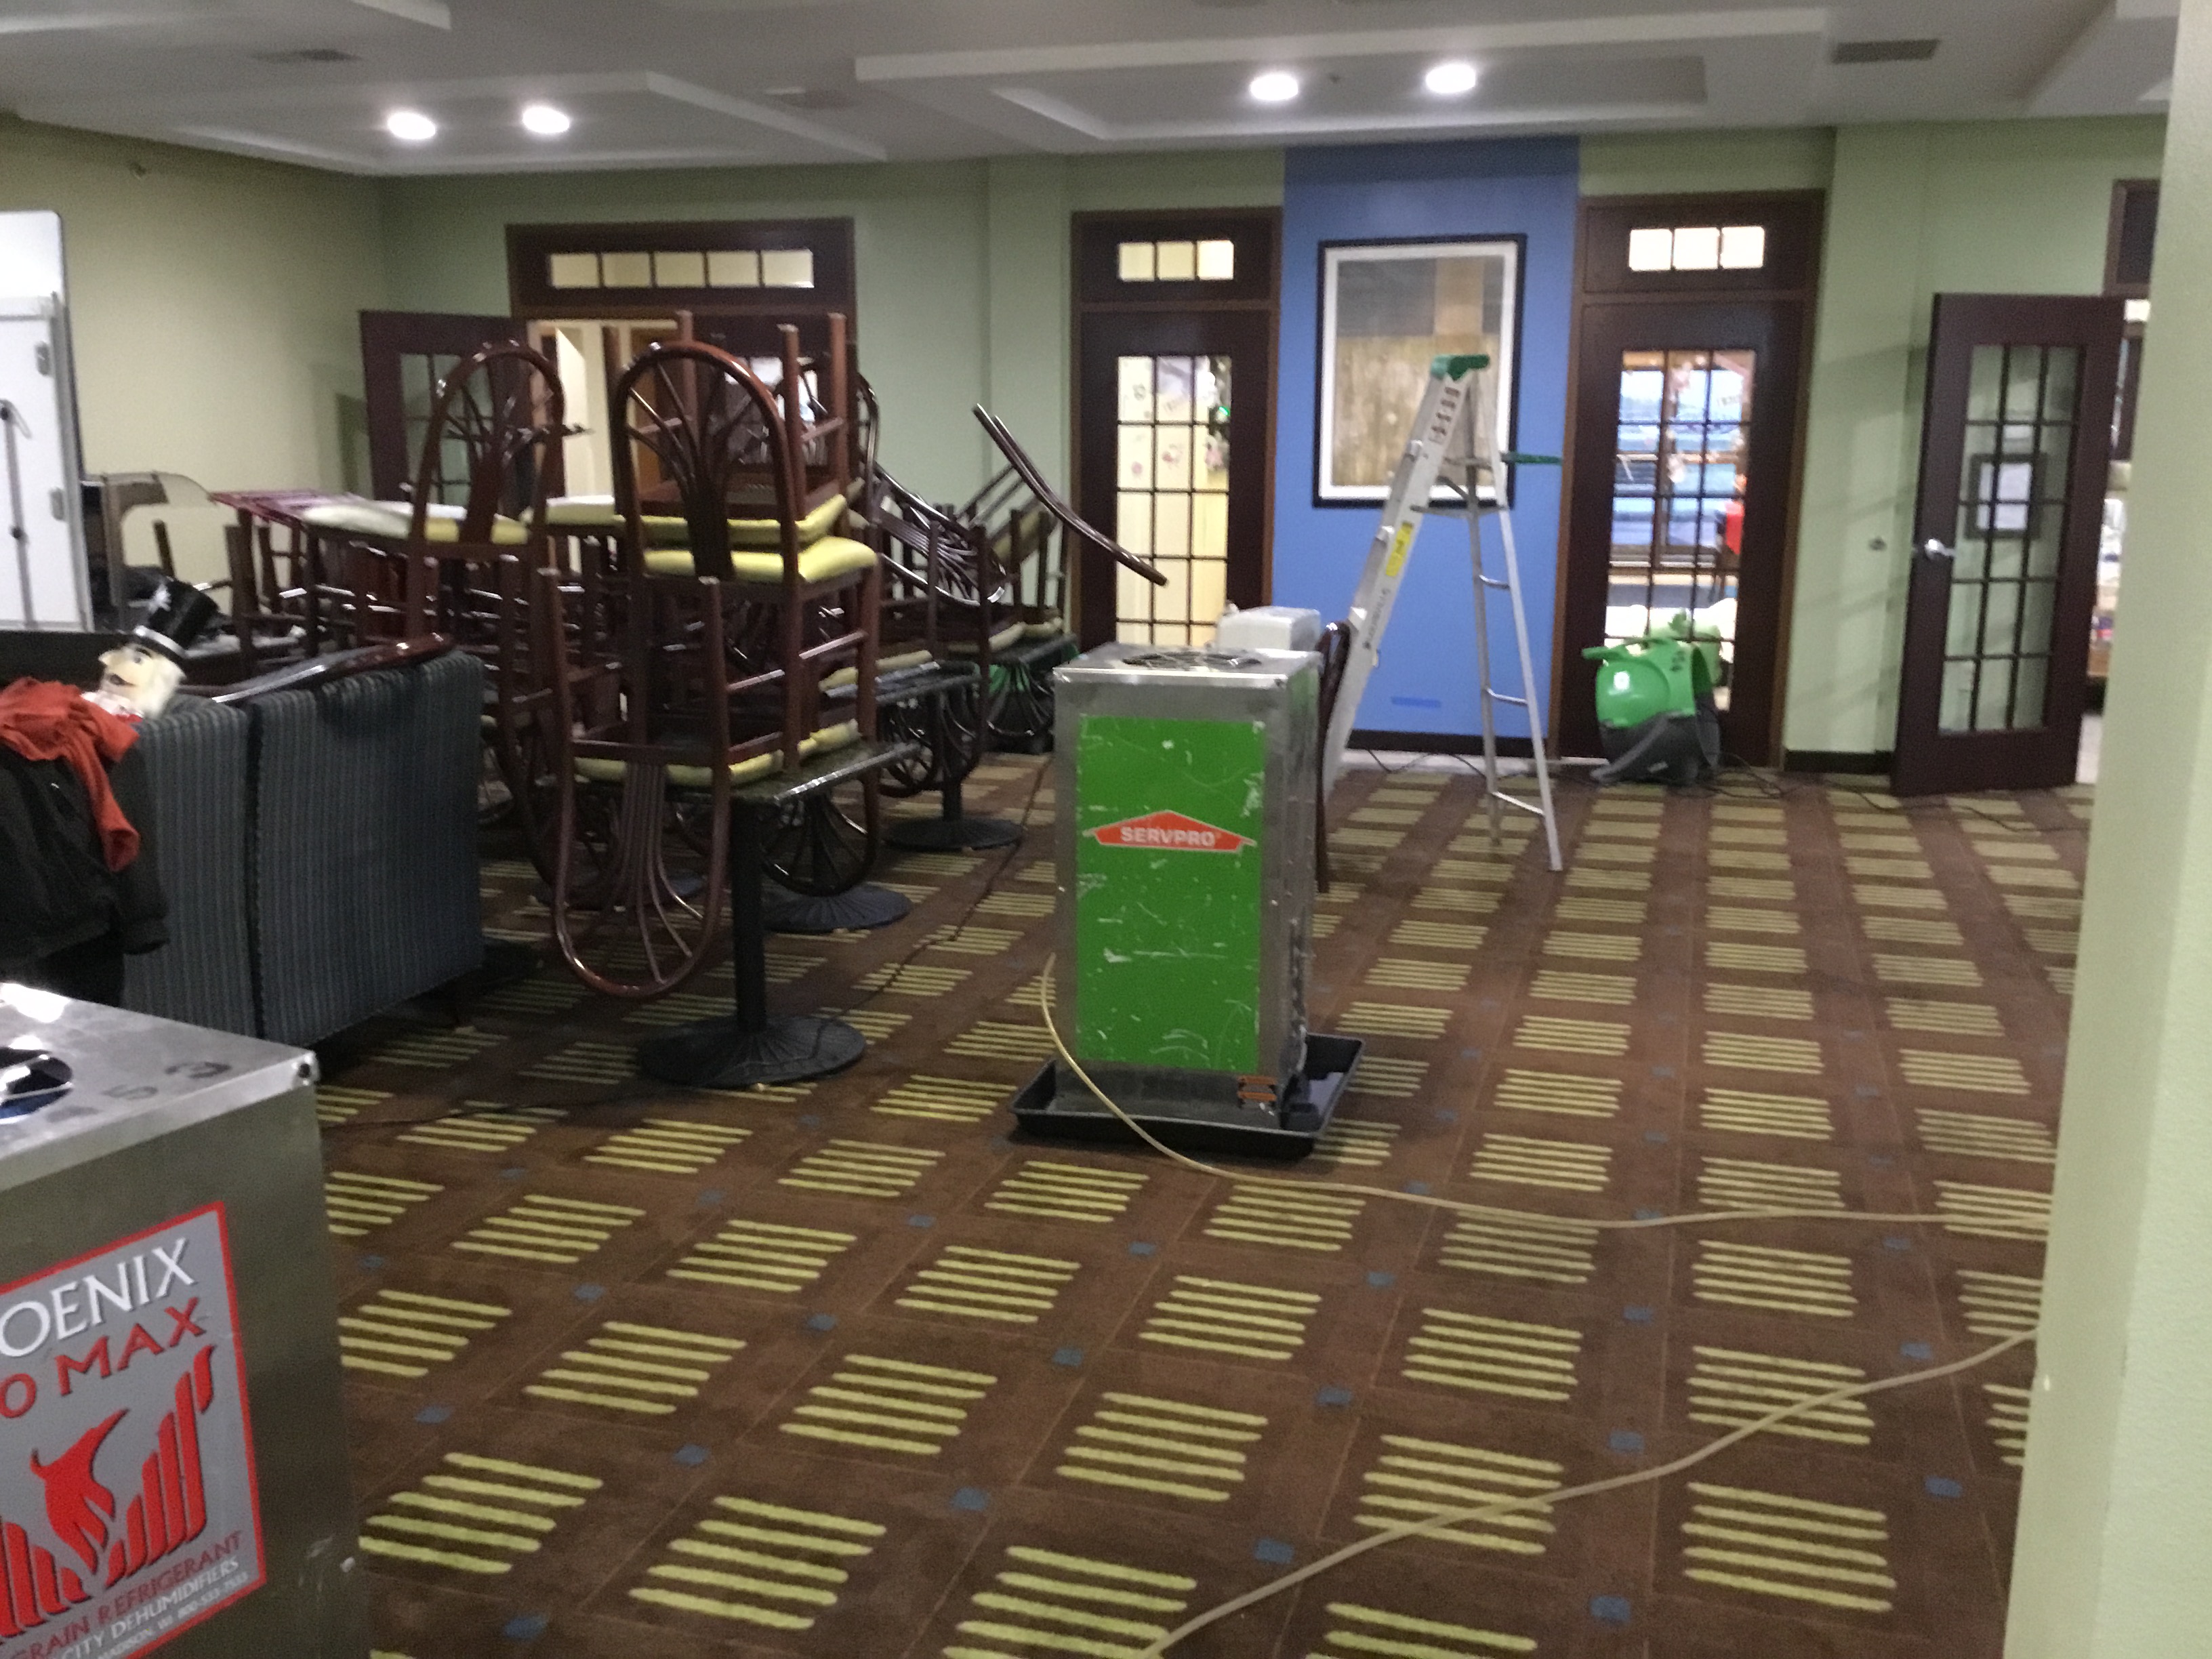 Commercial water damage restoration is no problem for our SERVPRO of St. Charles City team!